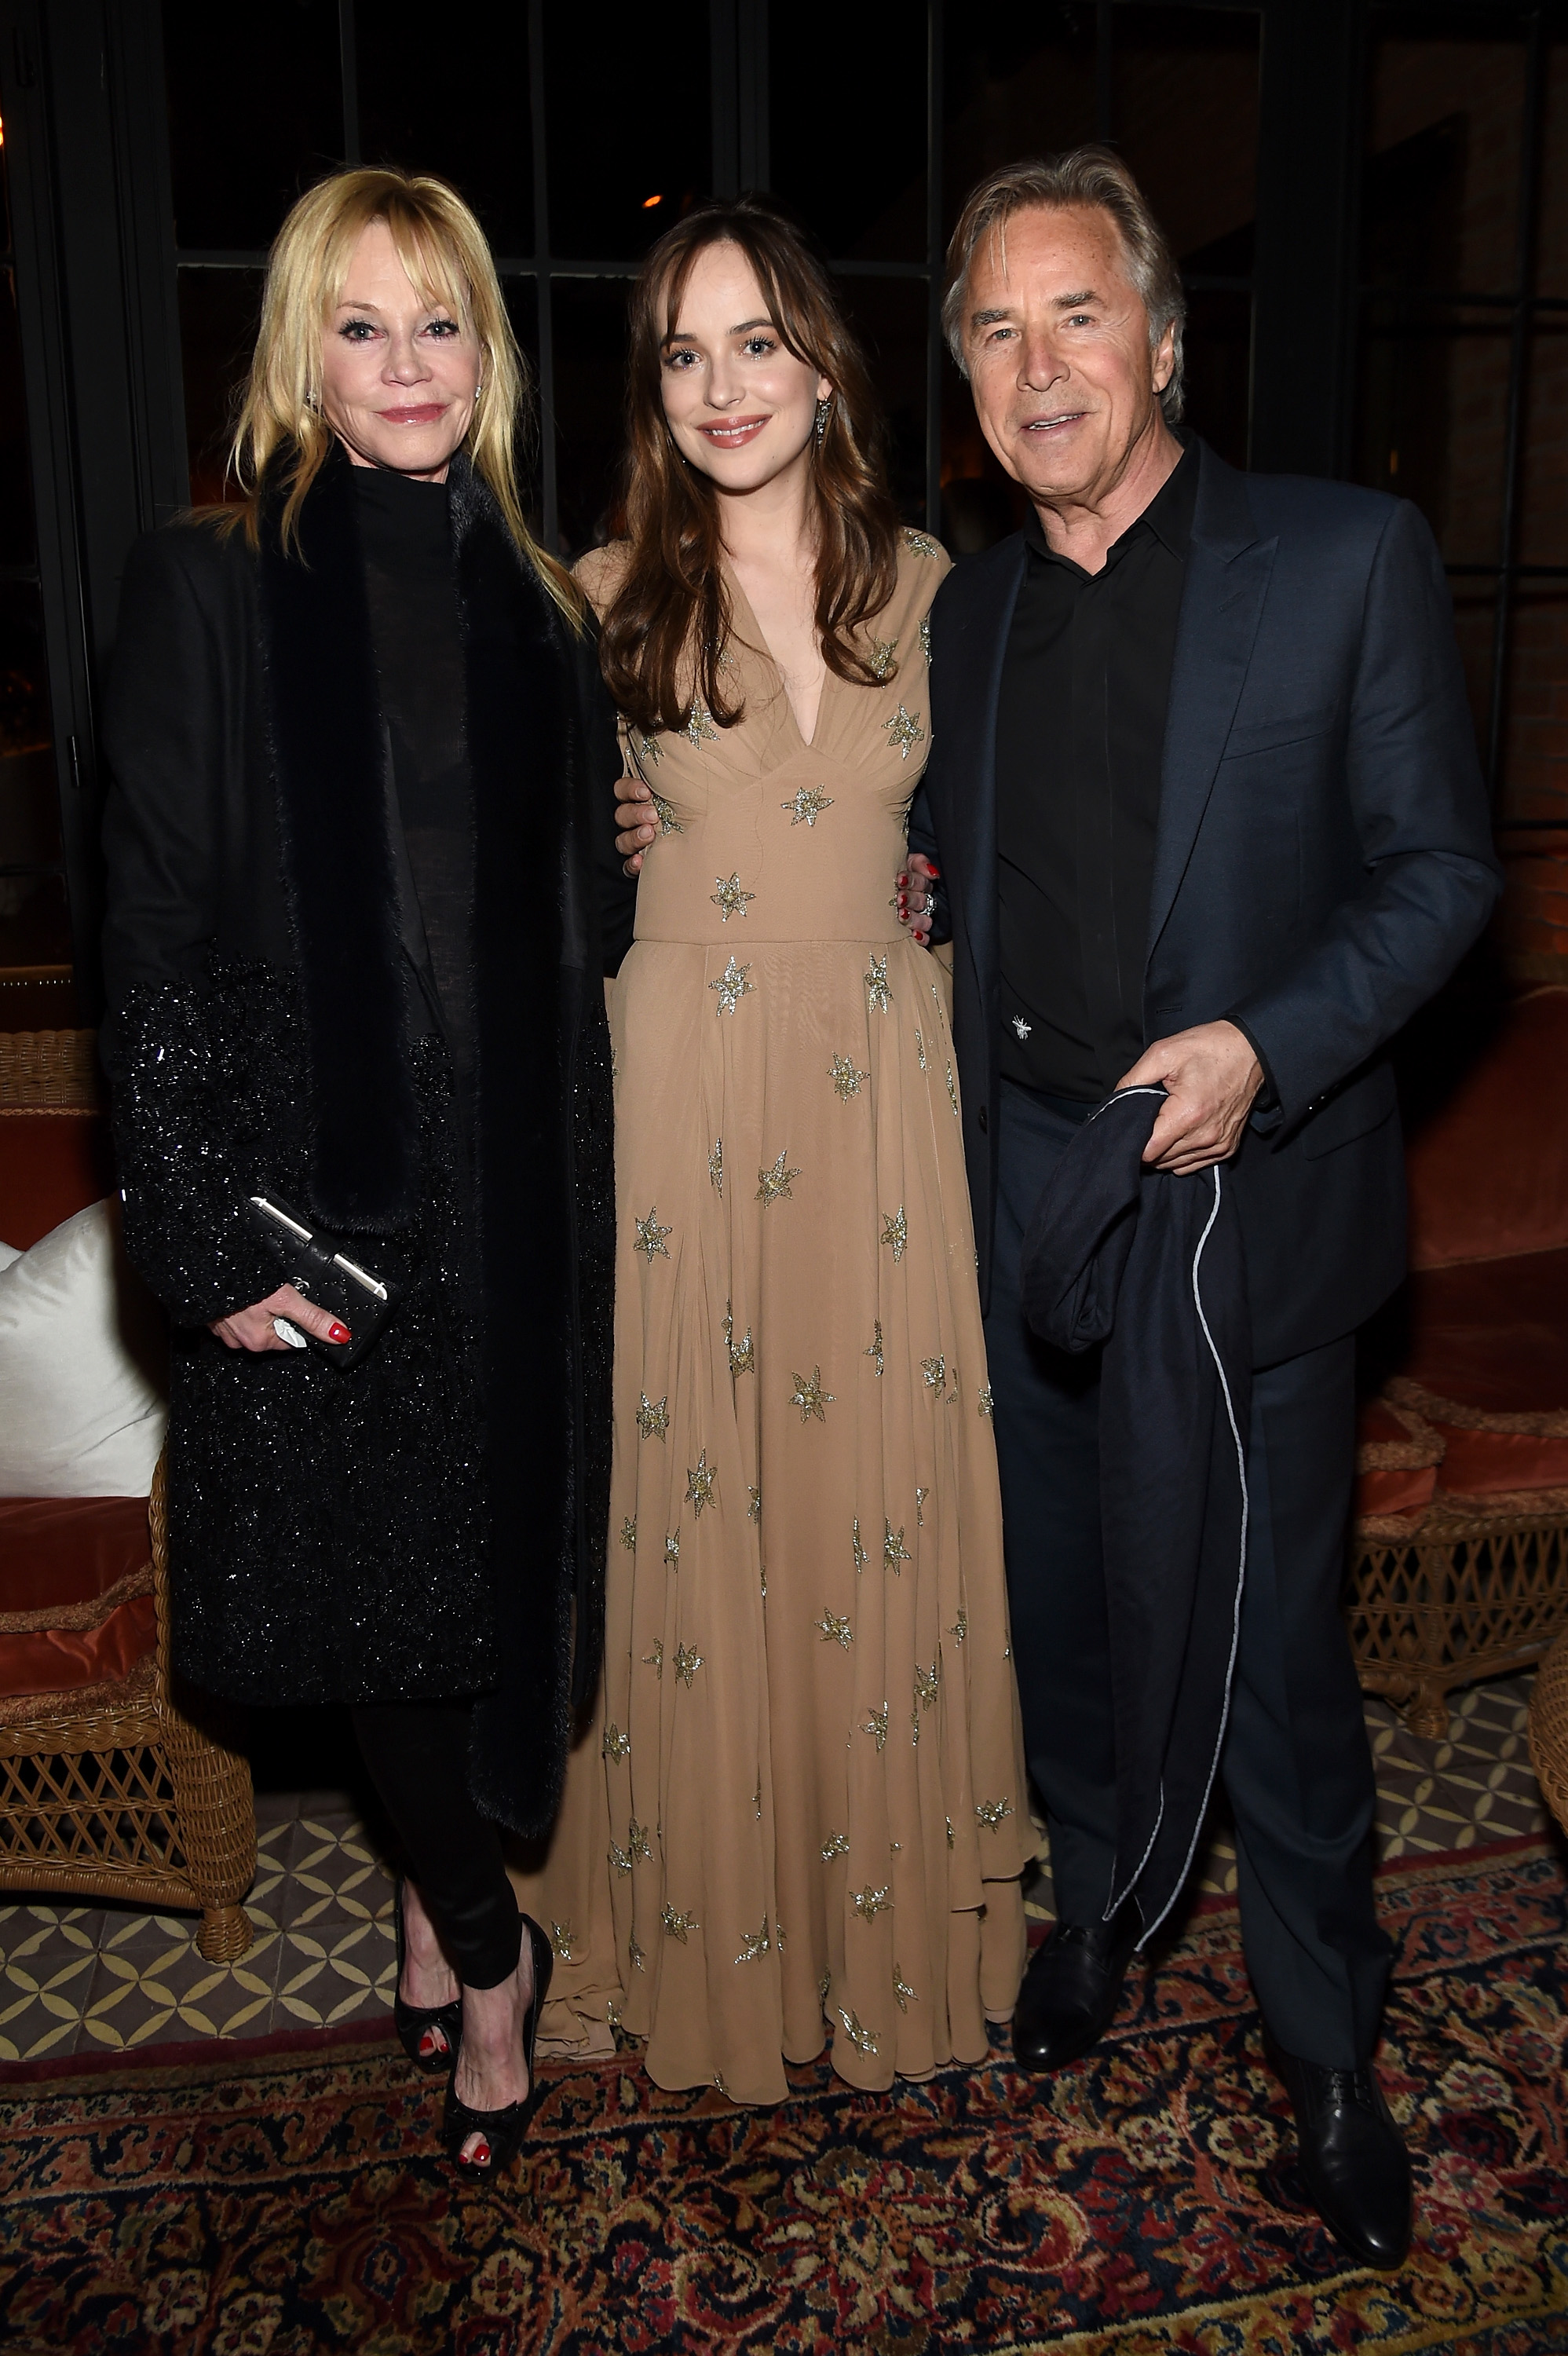 Melanie Griffith, Dakota Johnson, and Don Johnson attend the after-party for the premiere of "How To Be Single" in New York City on February 3, 2016 | Source: Getty Images